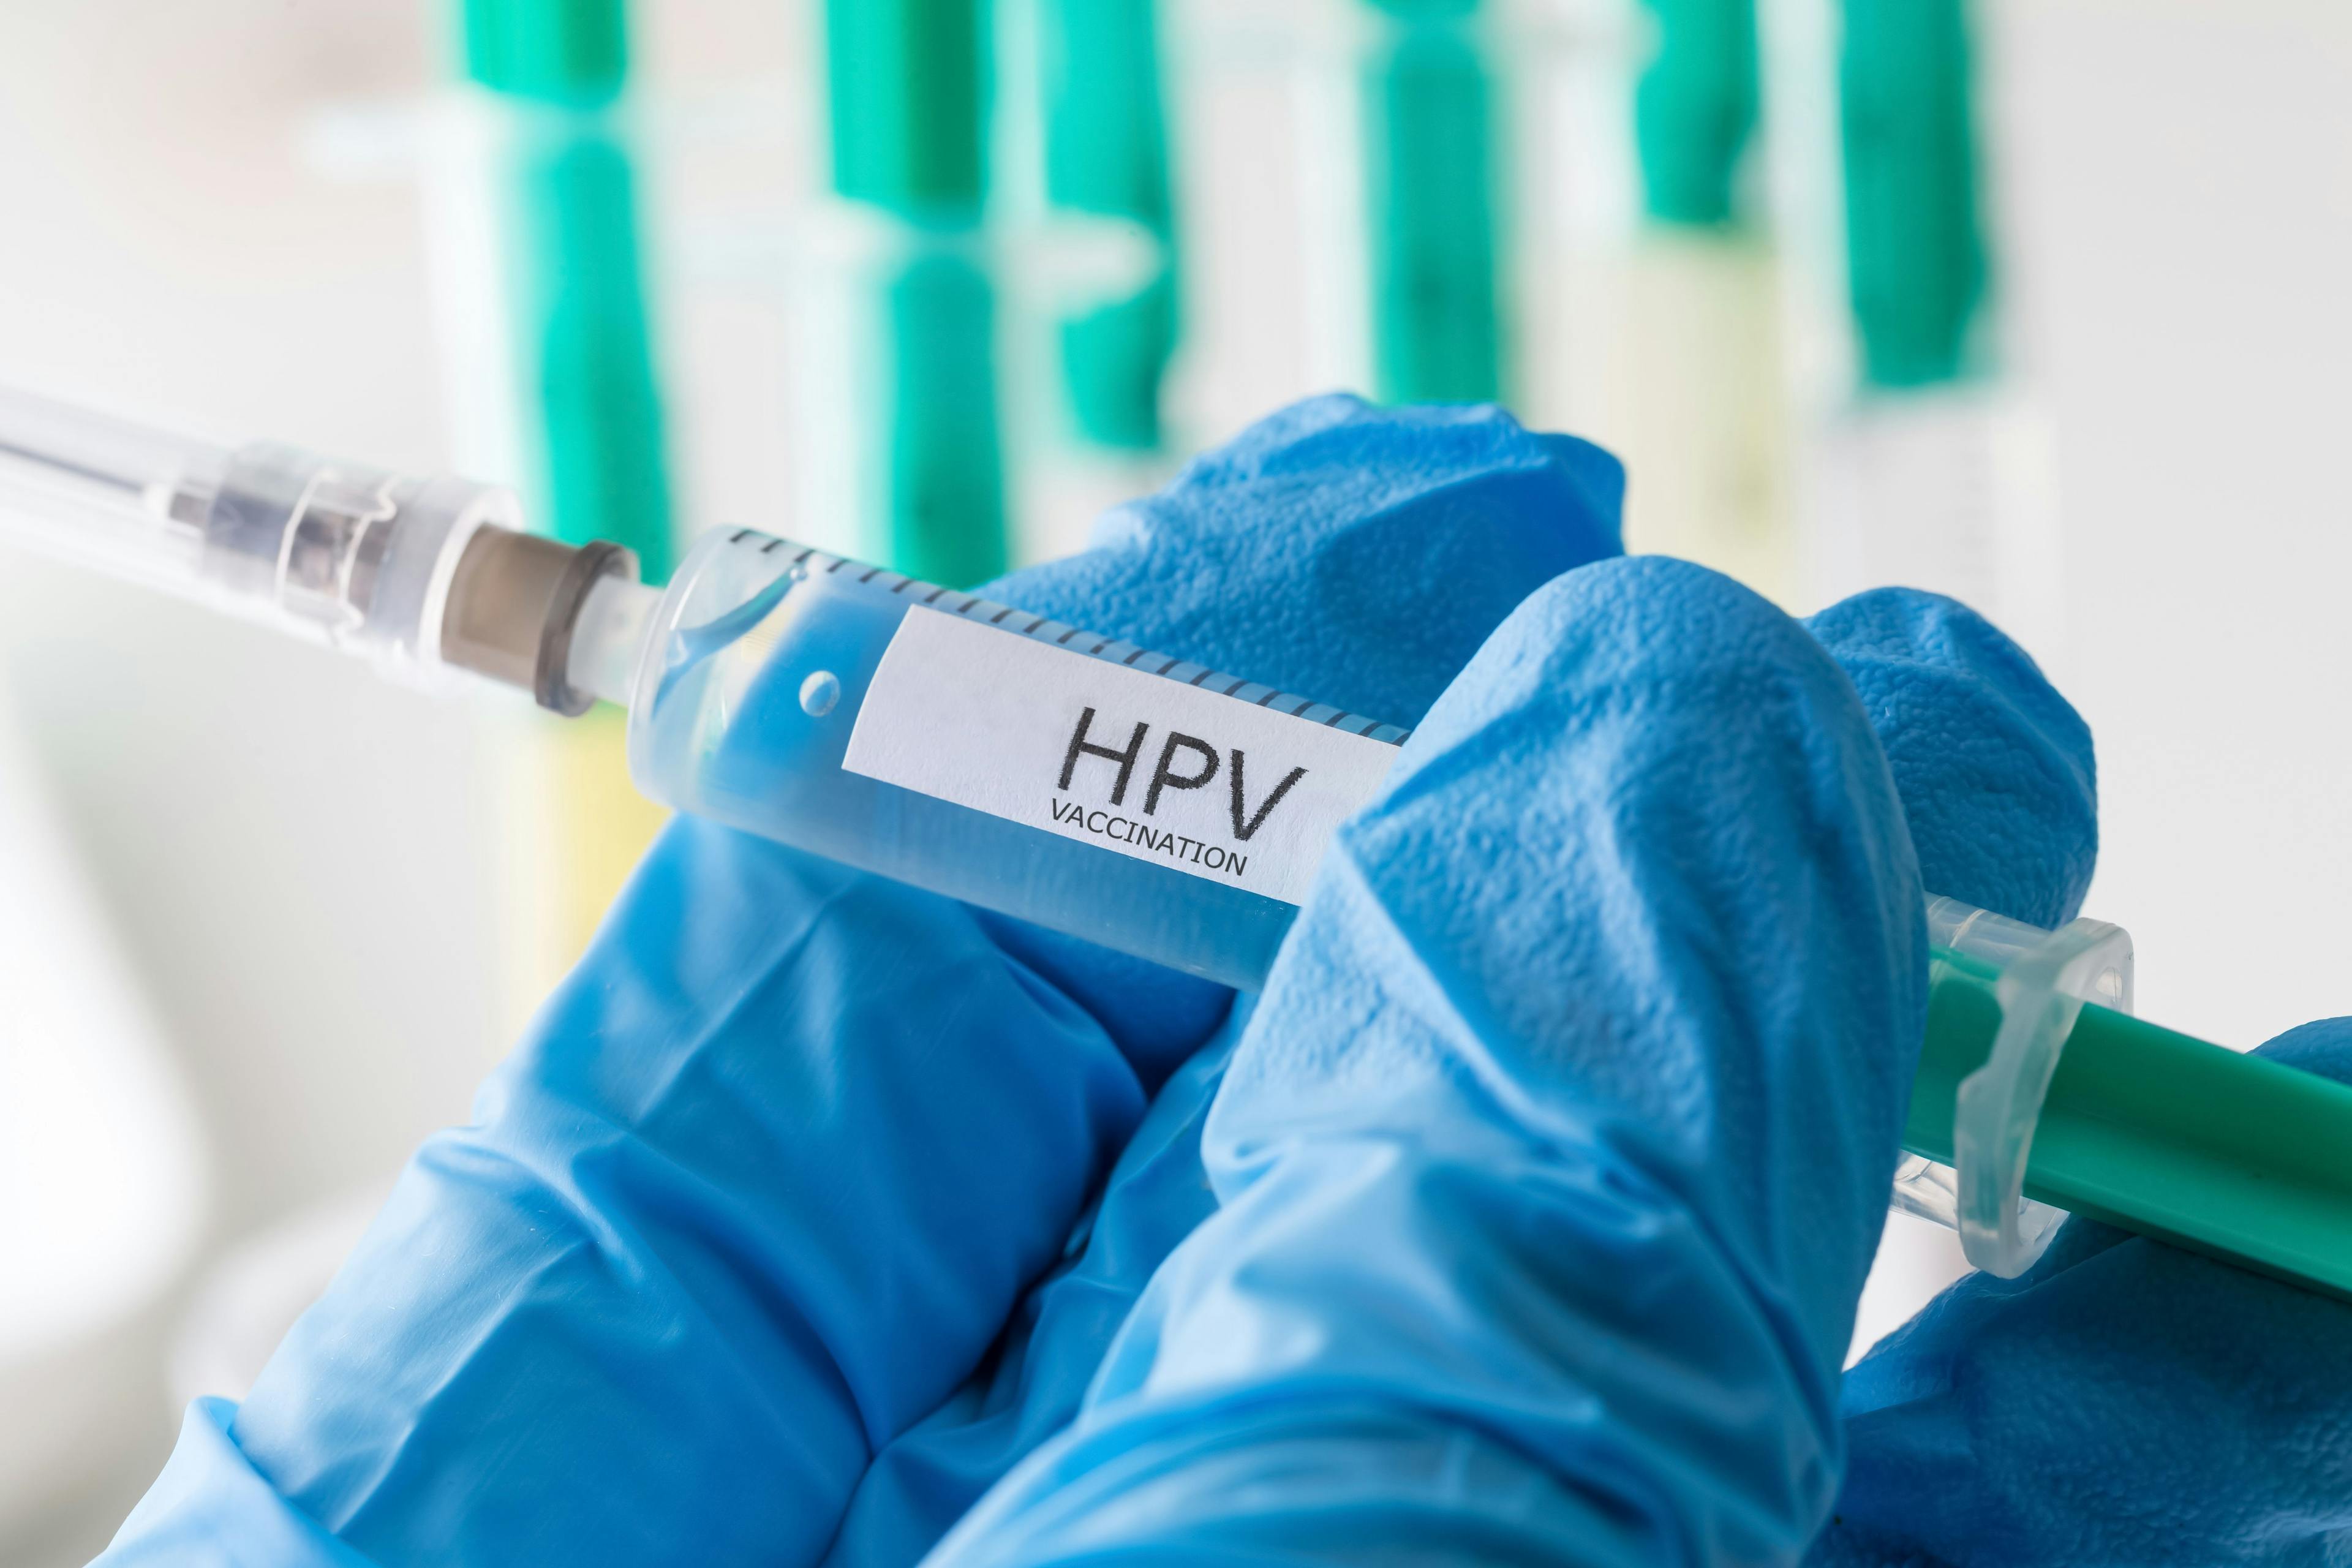 ‘Great Deal of Work’ Still Needed to Reverse Increasing Rates of Several HPV-Related Cancers